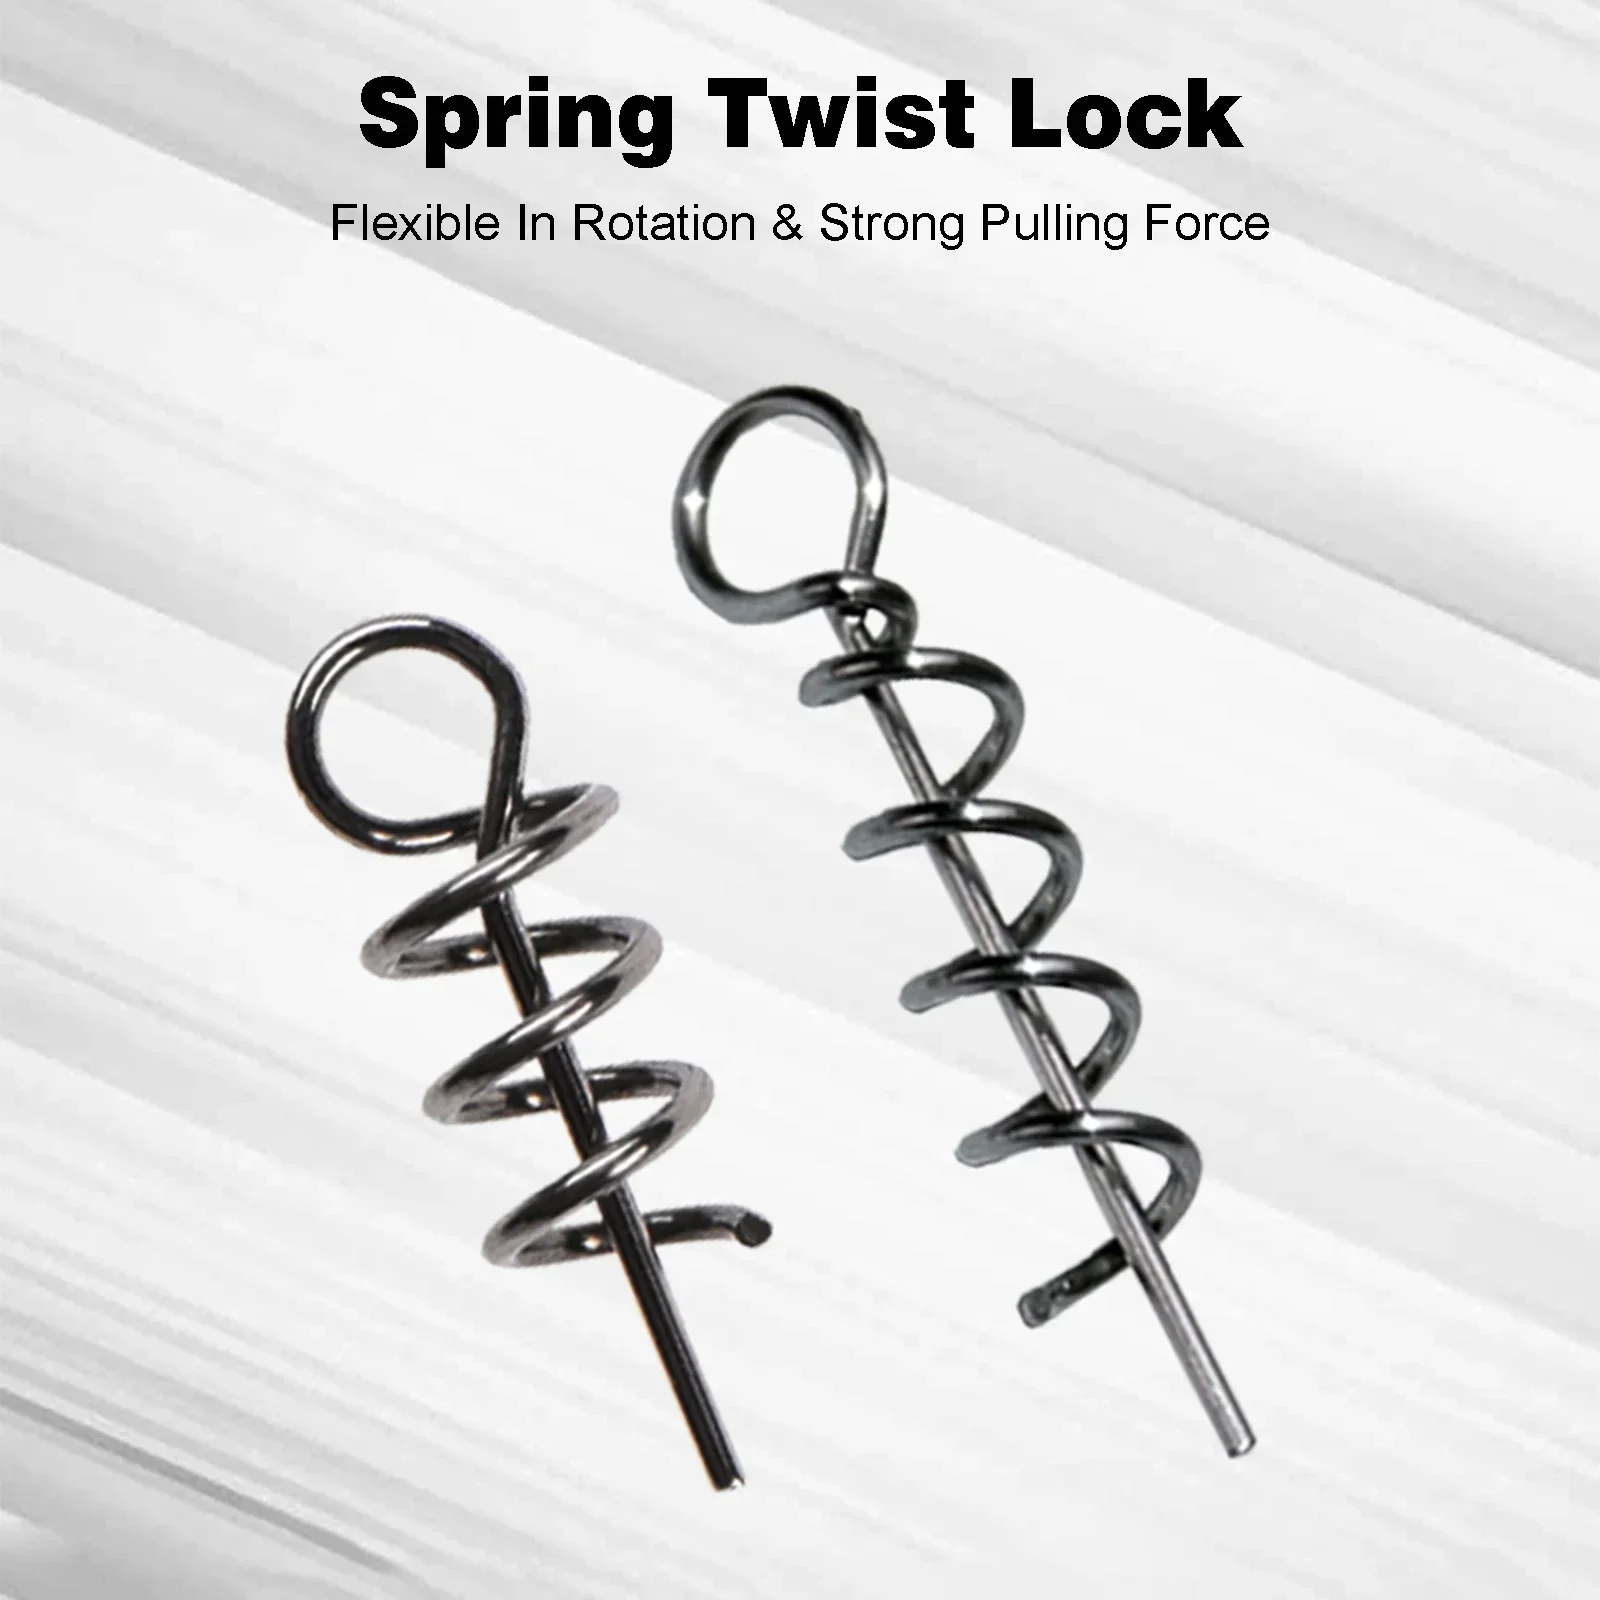 50pcs Soft Lure Bait Spring Twist Lock Fishing Hook Stainless 15/35mm Steel  Centering Pin for Soft Lure Bait Worm Crank Bait